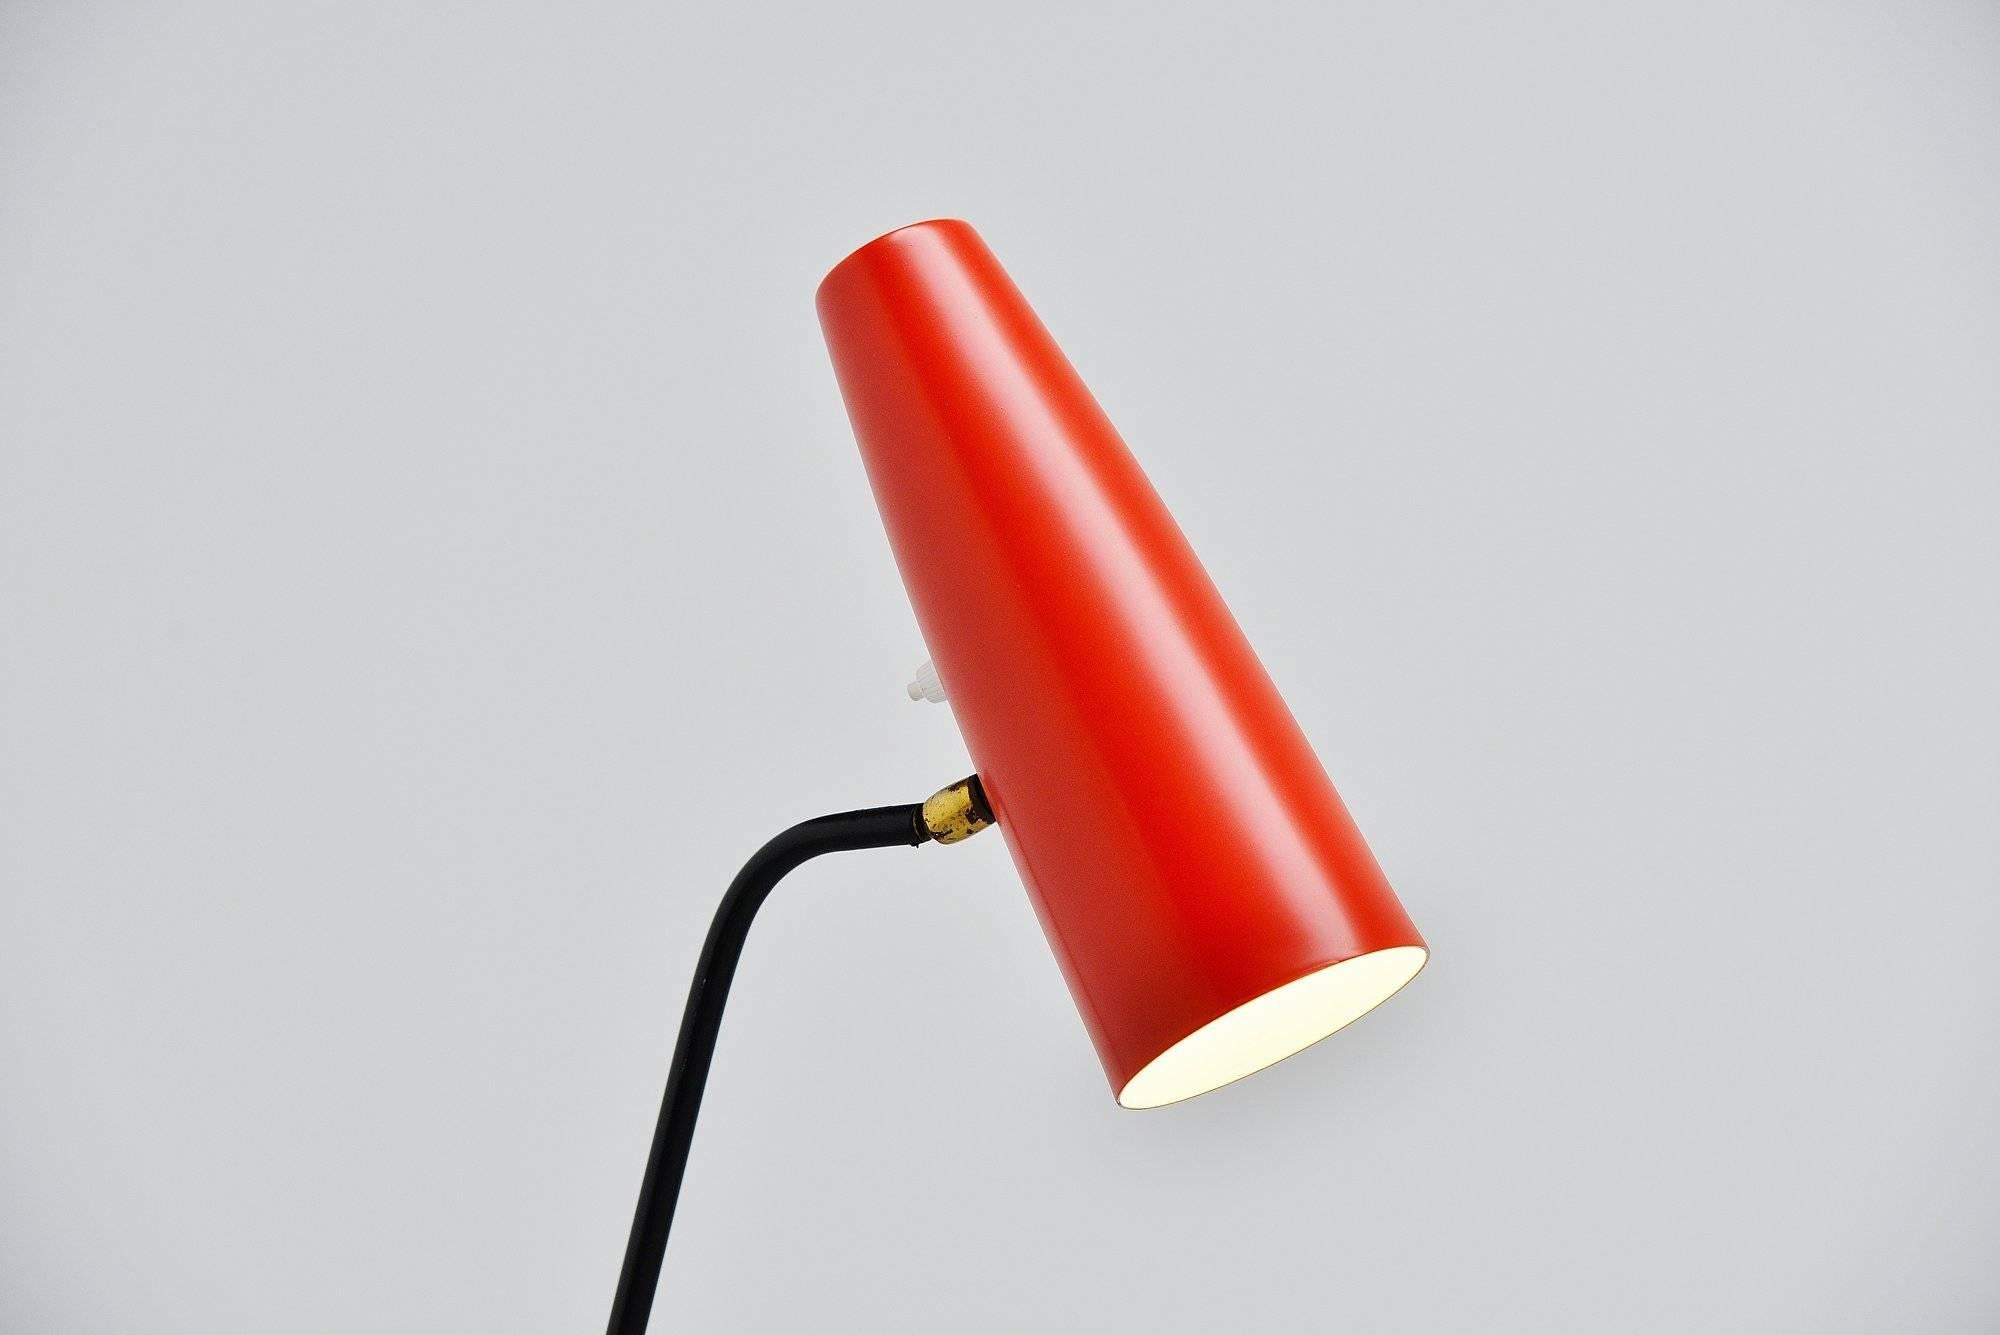 Very nicely shaped 'grasshopper' floor lamp made by unknown designed or manufacturer, Sweden, 1950. This lamp has a black painted base with brass feet. The shade is in red painted aluminium and has a very nice elegant shape. The shade is adjustable